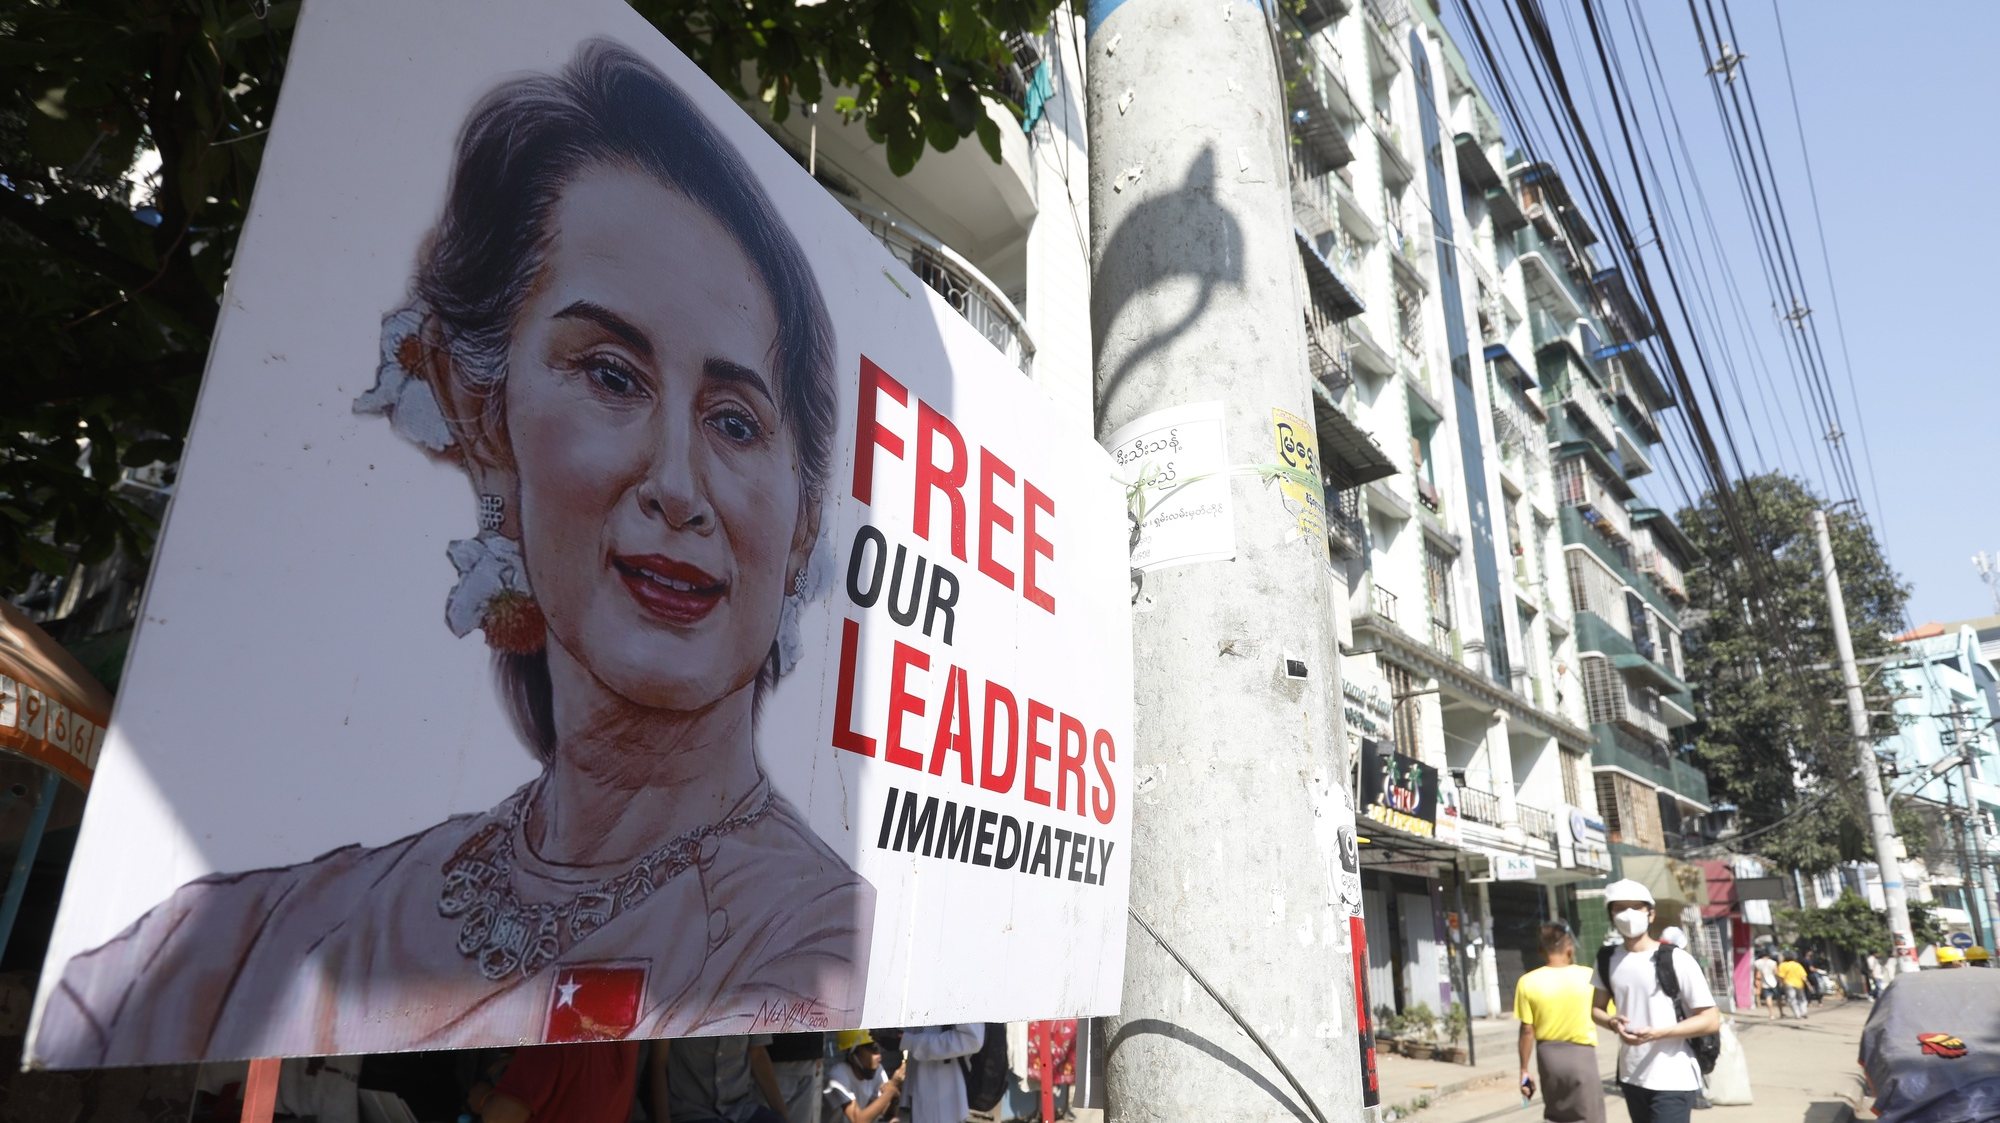 epa09053023 A banner calling for the release of detained civilian leader Aung San Suu Kyi is displayed on the street during a protest against the military coup in Yangon, Myanmar, 05 March 2021. Anti-coup protests continued on 05 March despite the increasingly violent crackdowns on demonstrators by security forces. More than 50 people have died in the crackdown by security forces, since the military coup on 01 February 2021.  EPA/NYEIN CHAN NAING